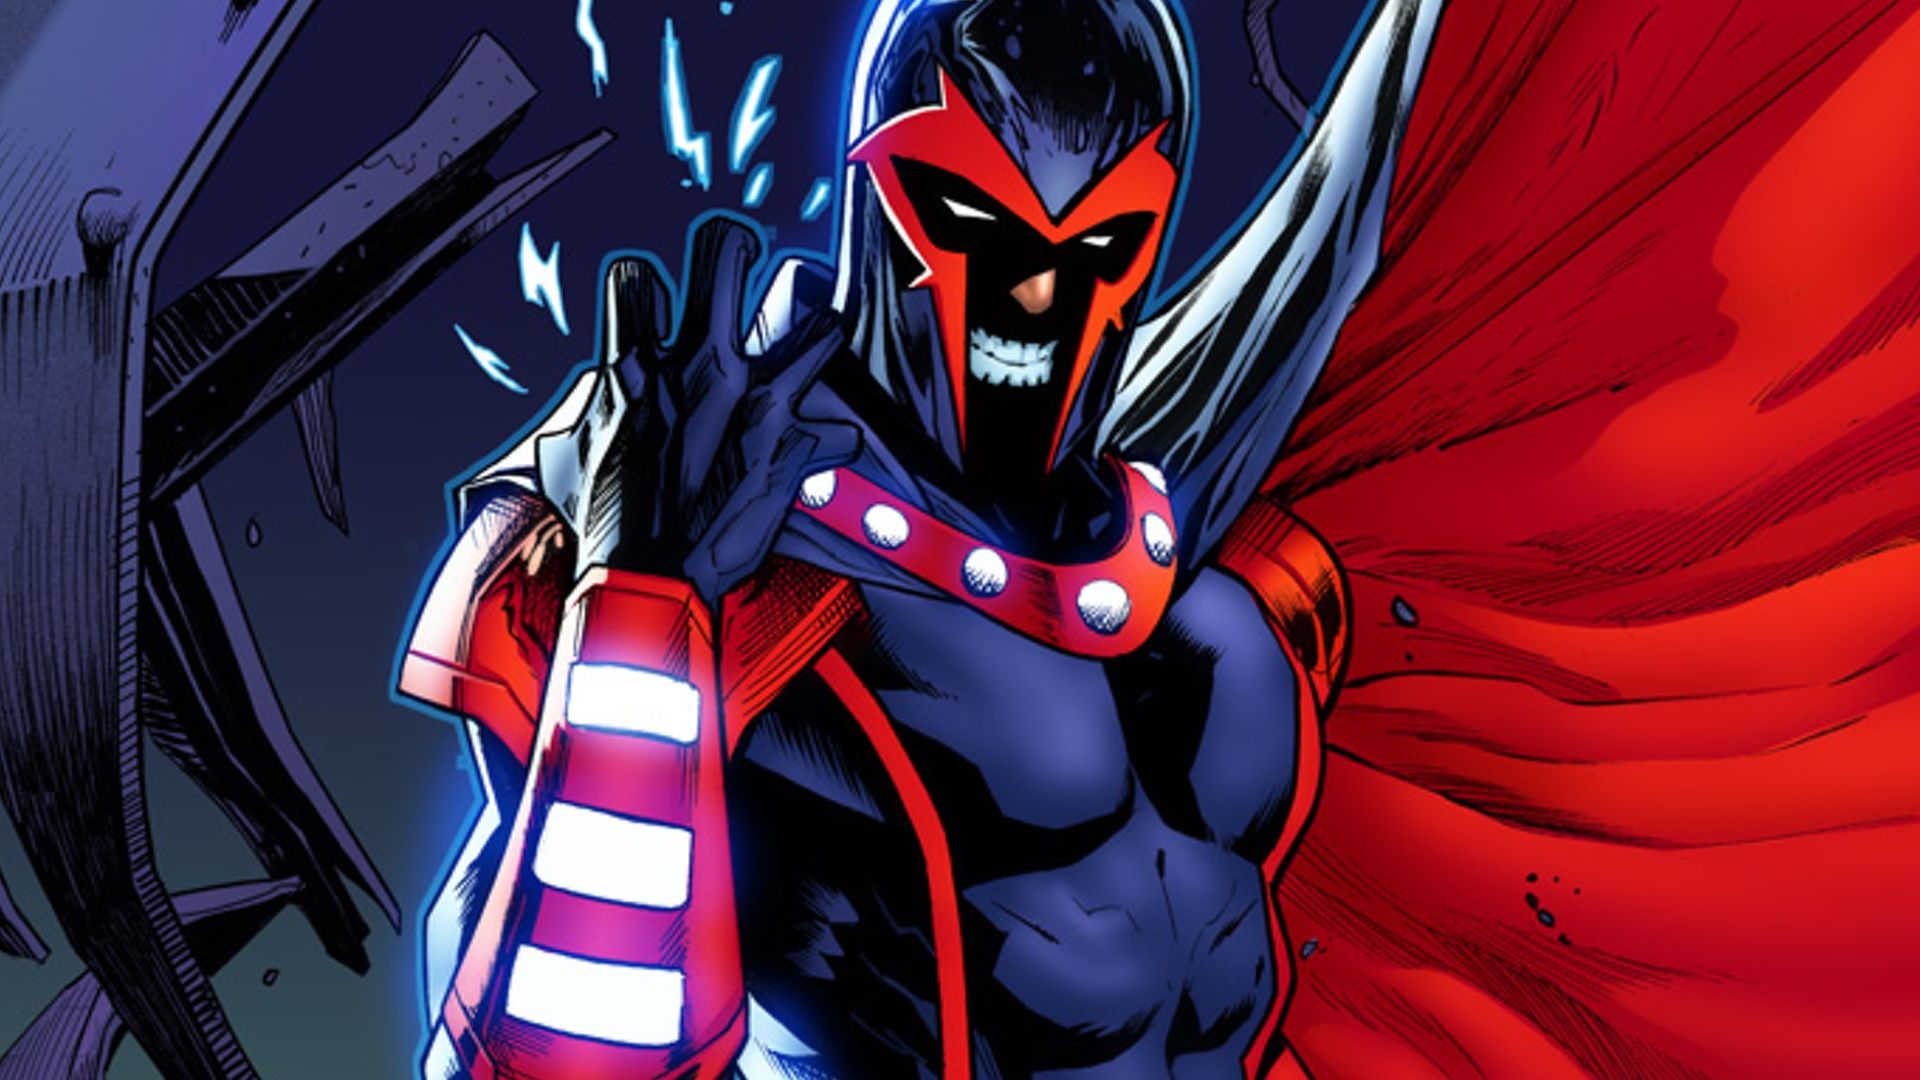 Wait. Magneto, A Holocaust Survivor, Is Now a Nazi in the Marvel Comics? What?!